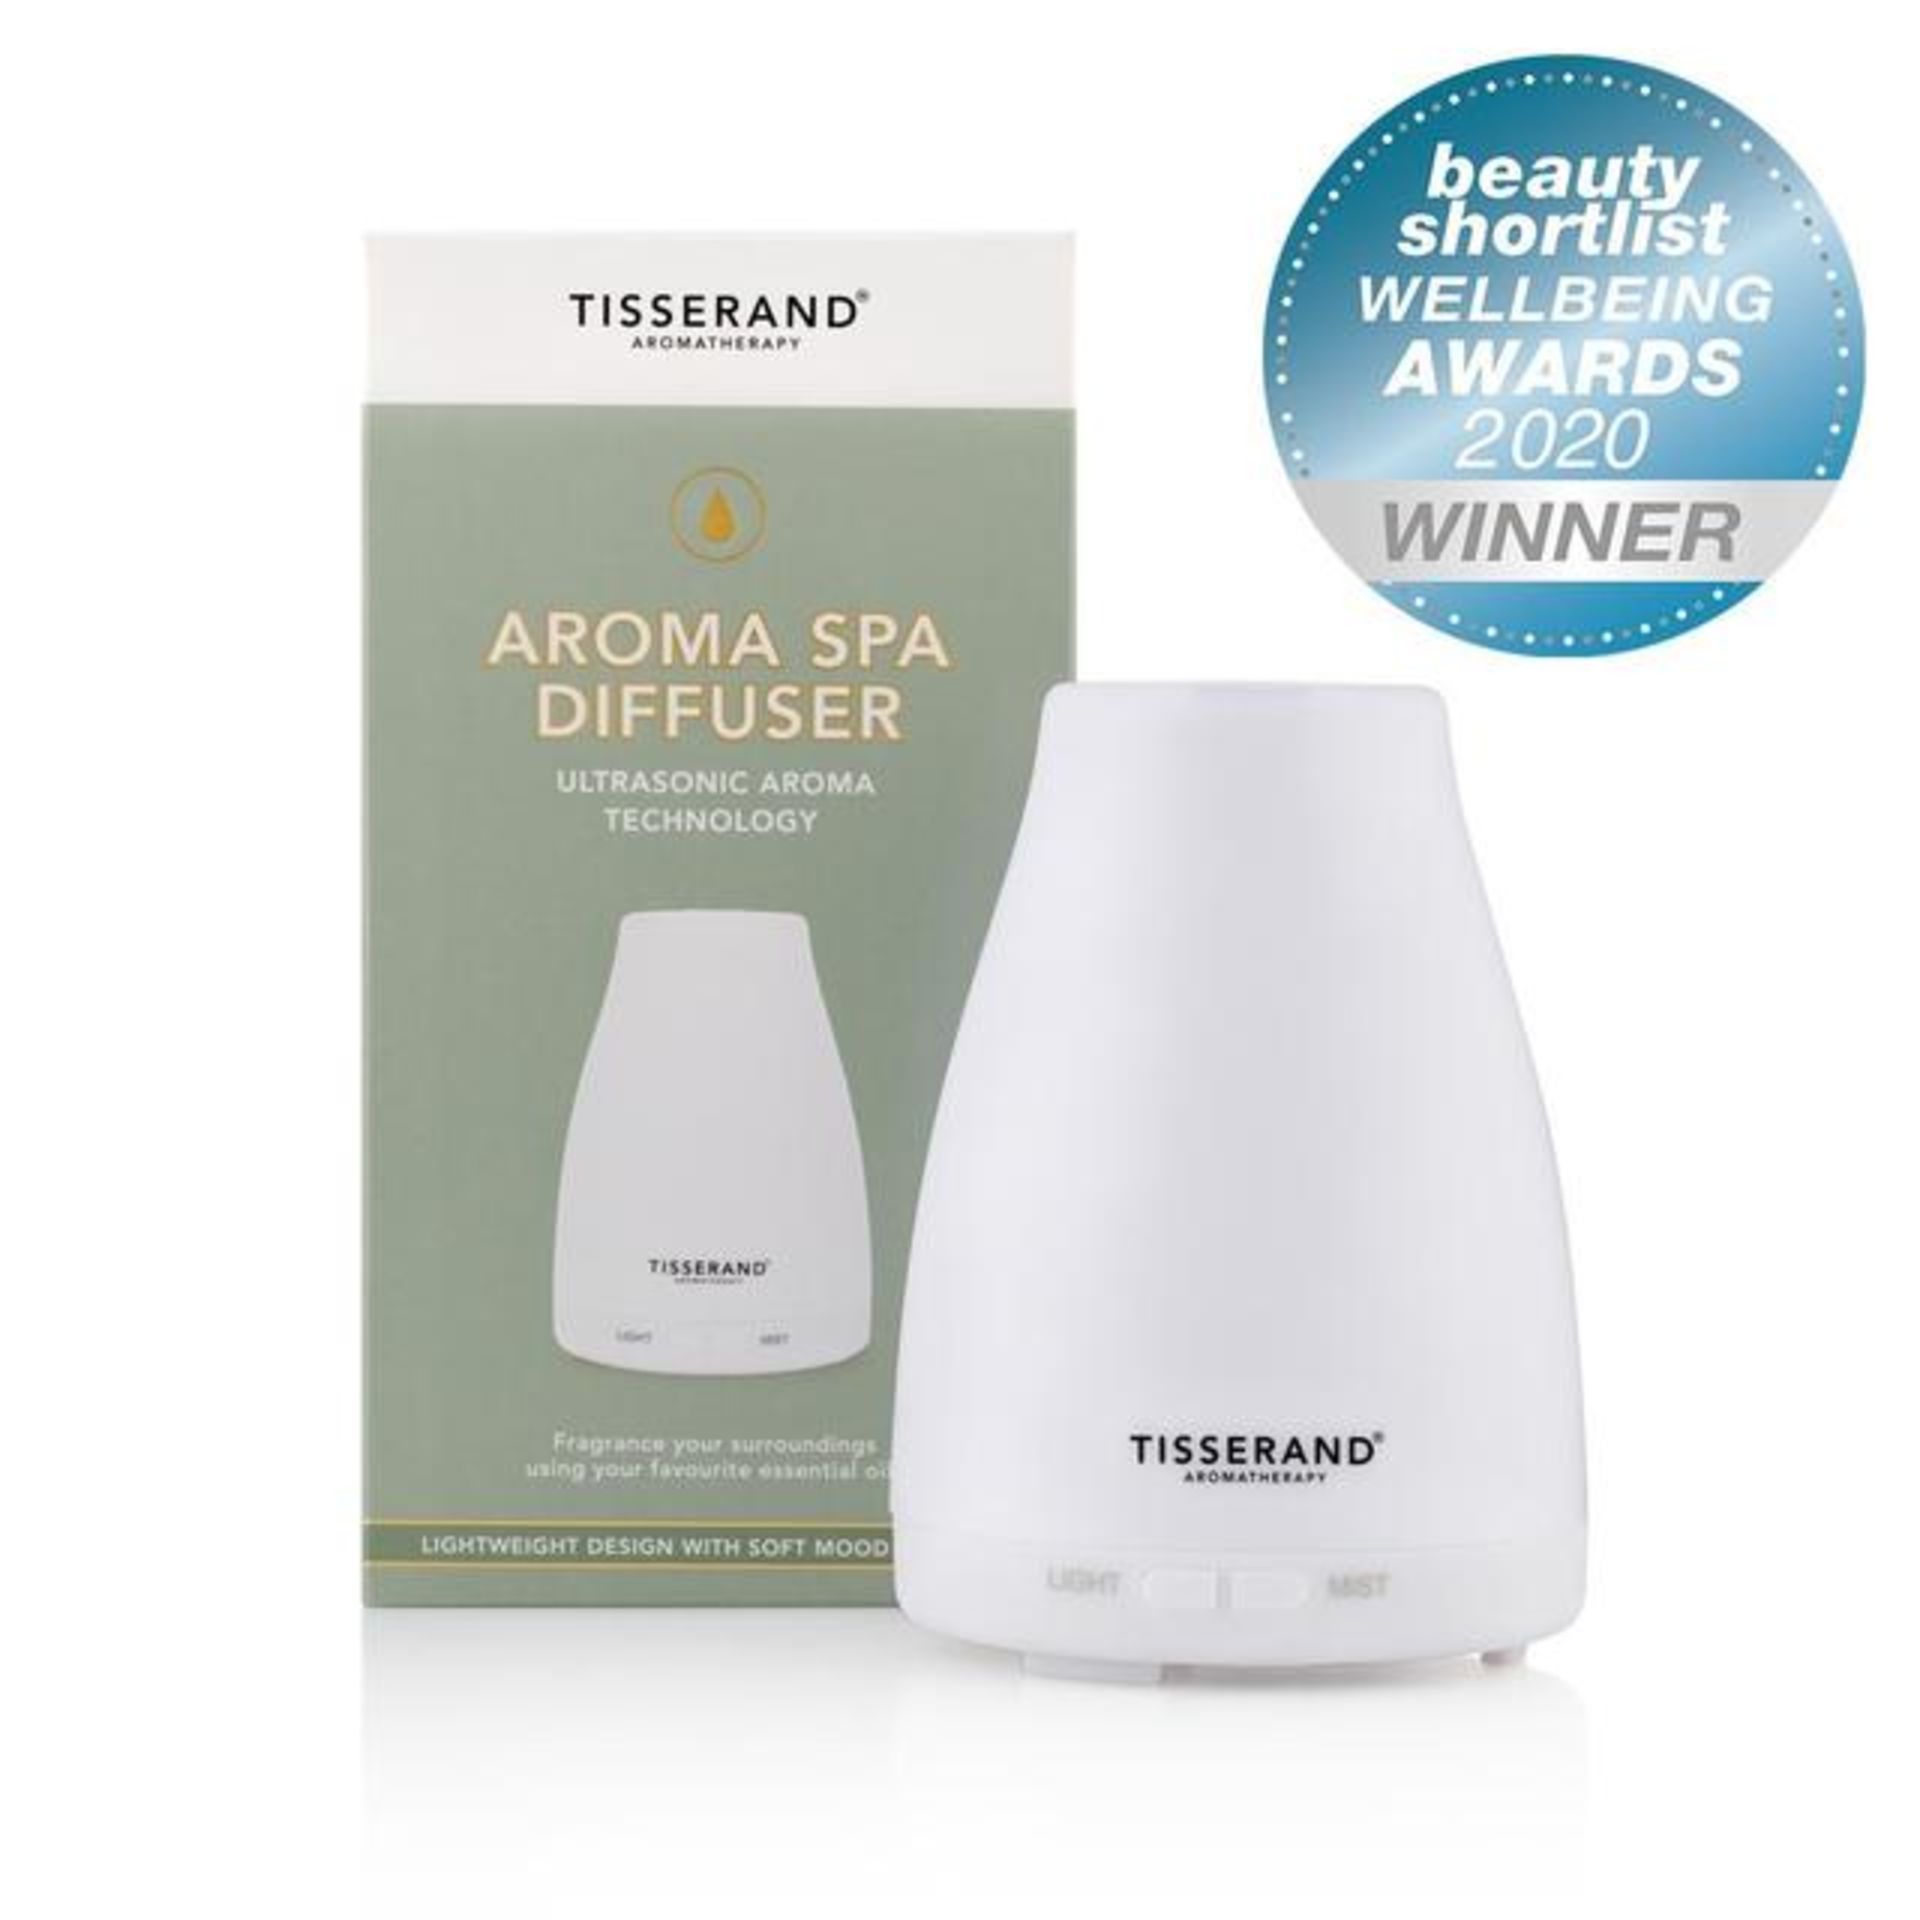 TISSERAND AROMA SPA DIFFUSER ULTRASONIC AROMA TECHNOLOGY RRP £35 Condition ReportAppraisal Available